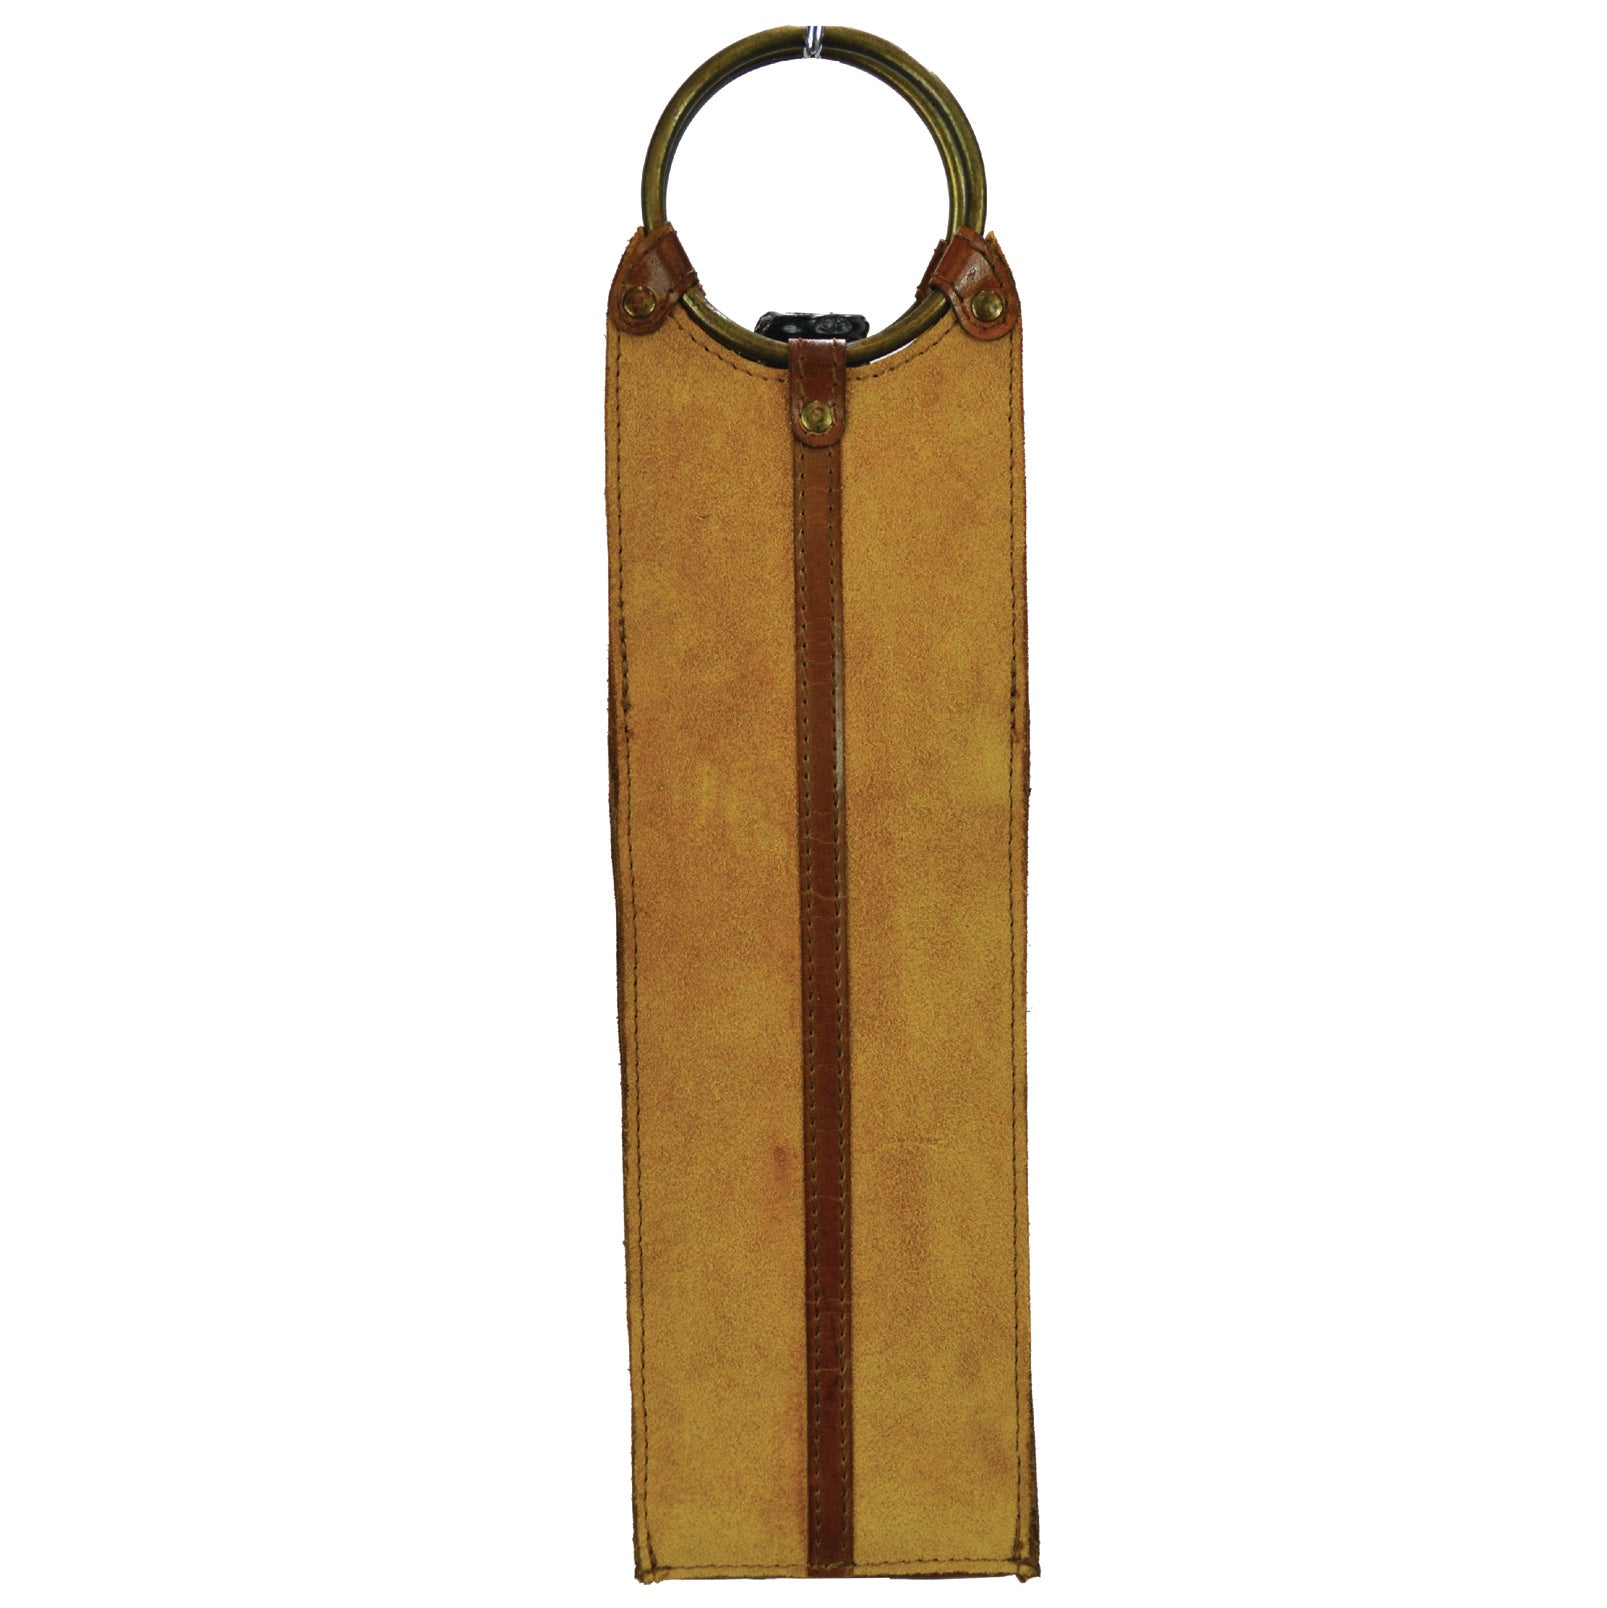 Dorath Tan Suede Leather Single Wine Holder with Ring Handles - Notbrand